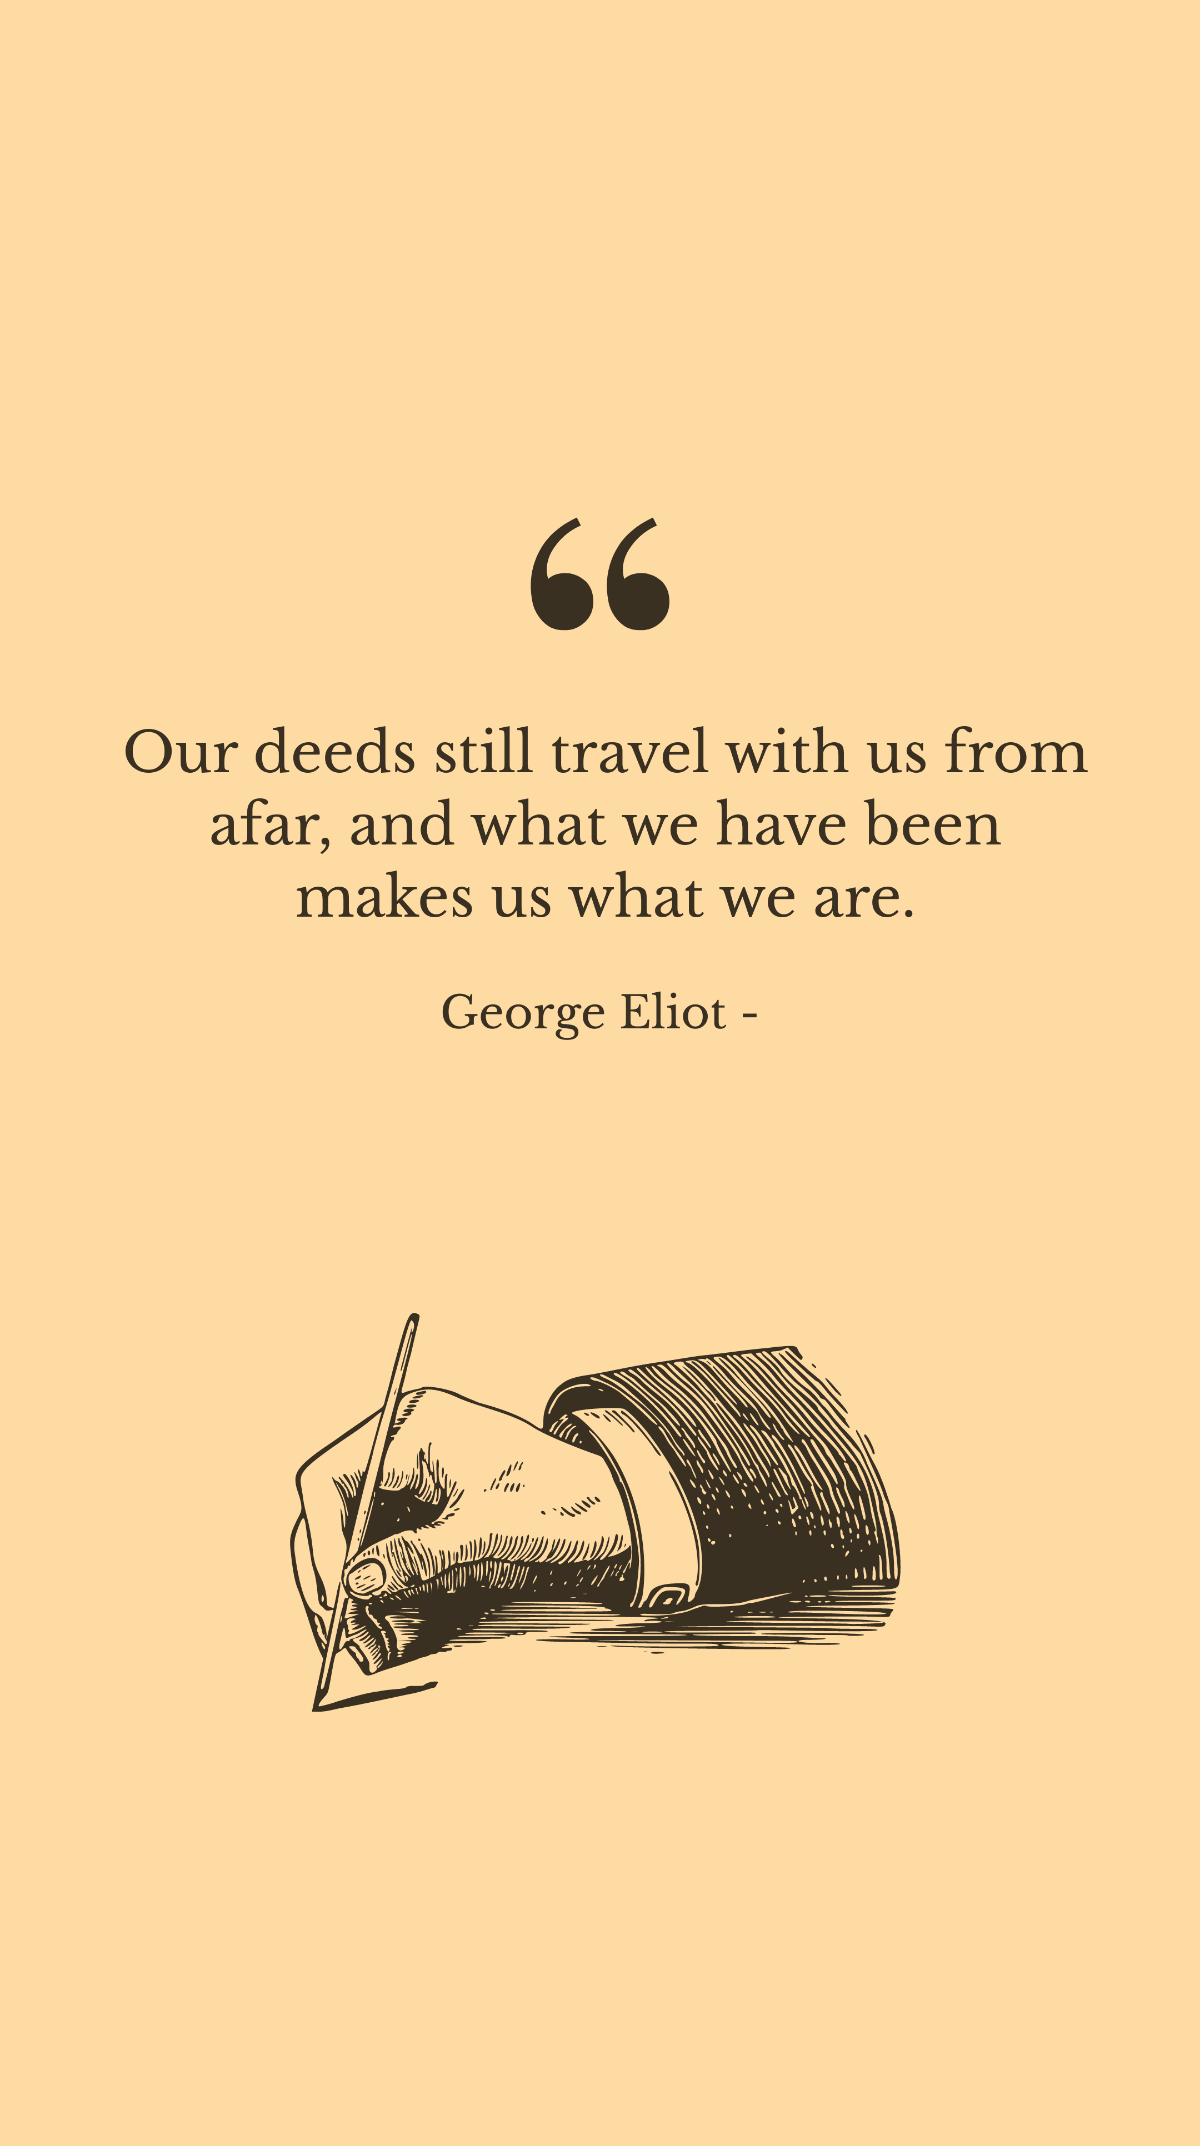 George Eliot - Our deeds still travel with us from afar, and what we have been makes us what we are.